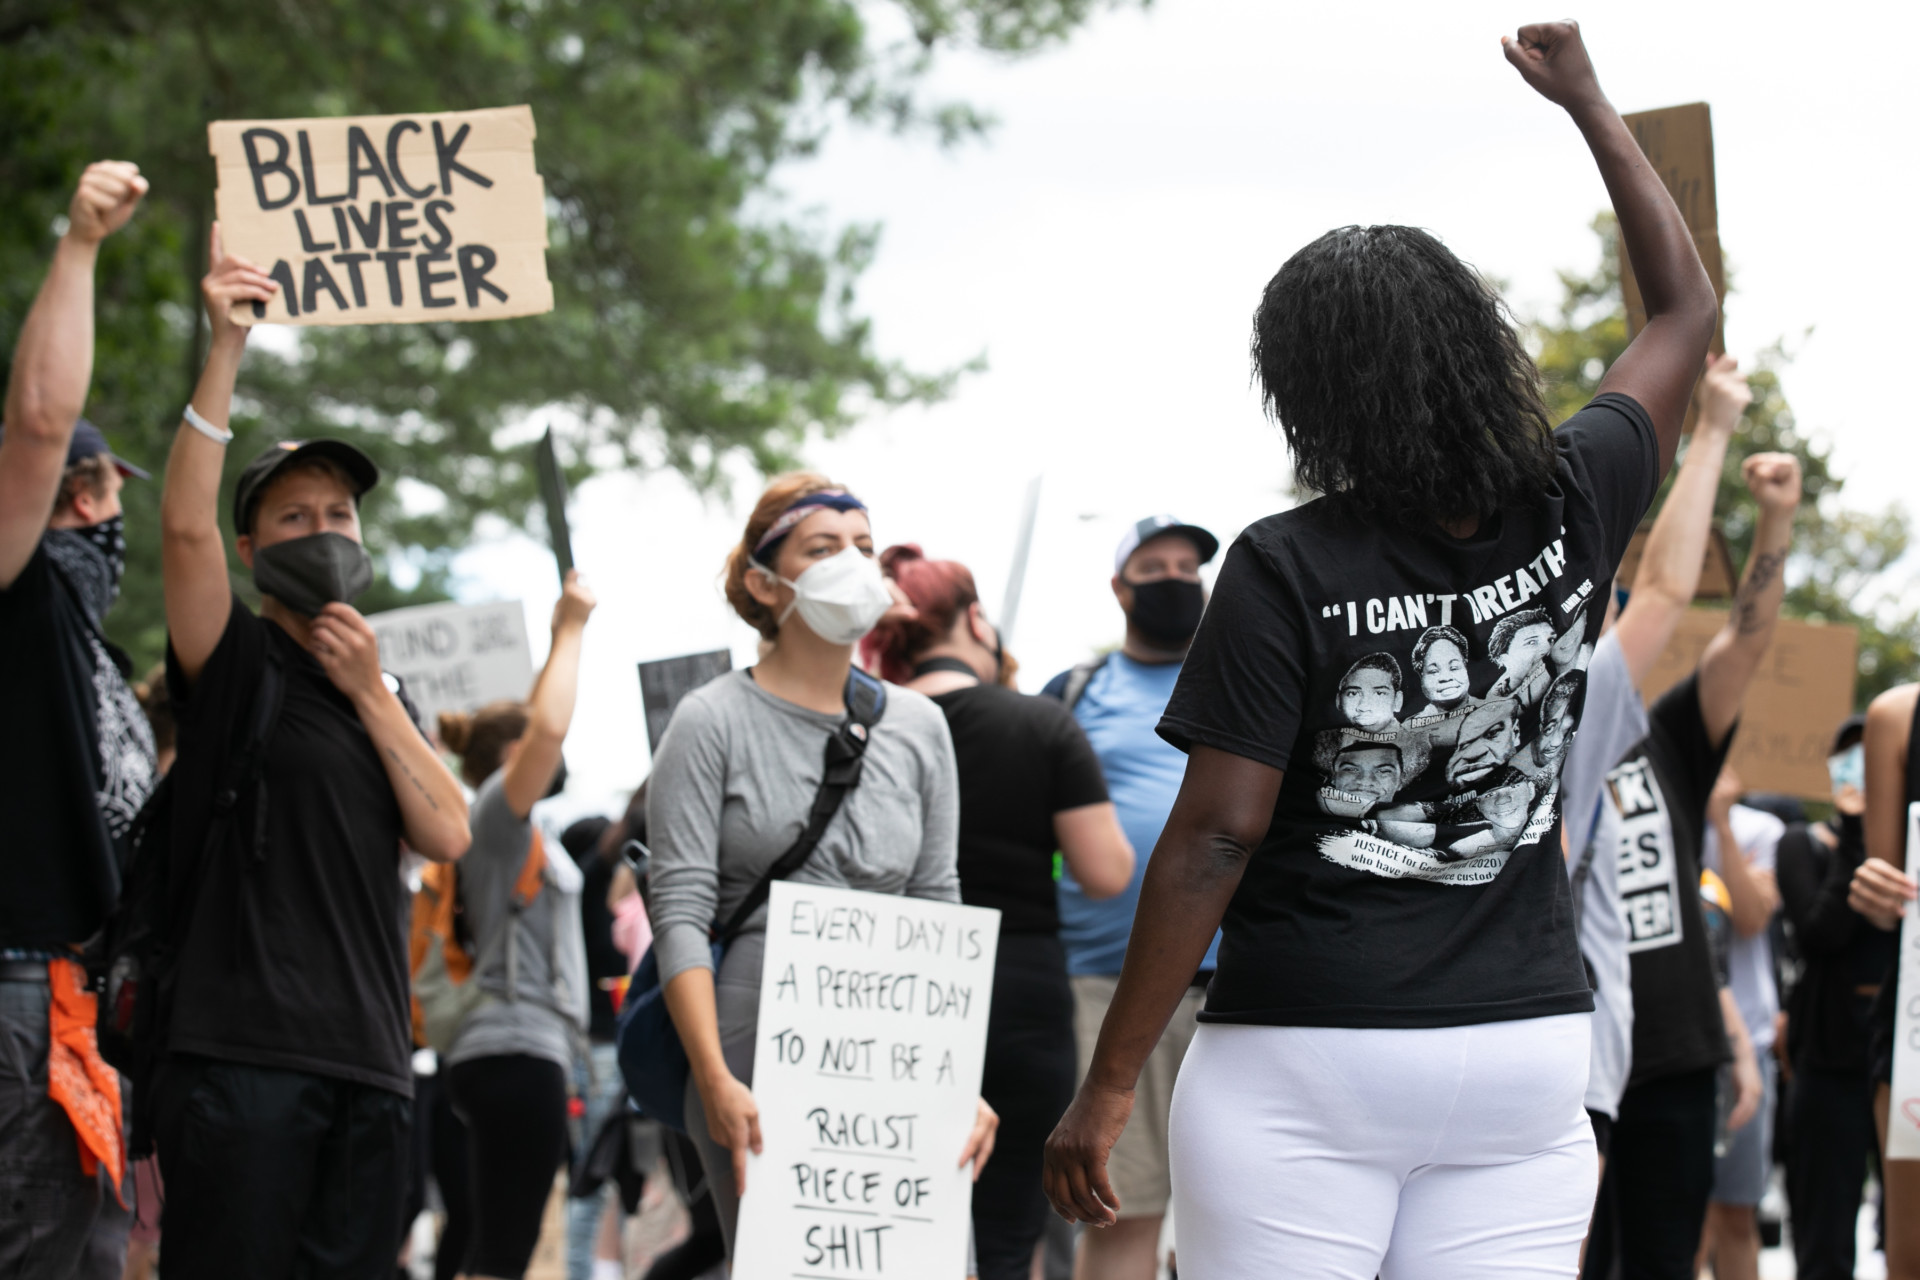 Black Lives Matter Holds Protest Over Recent Police Killings In Stone Mountain